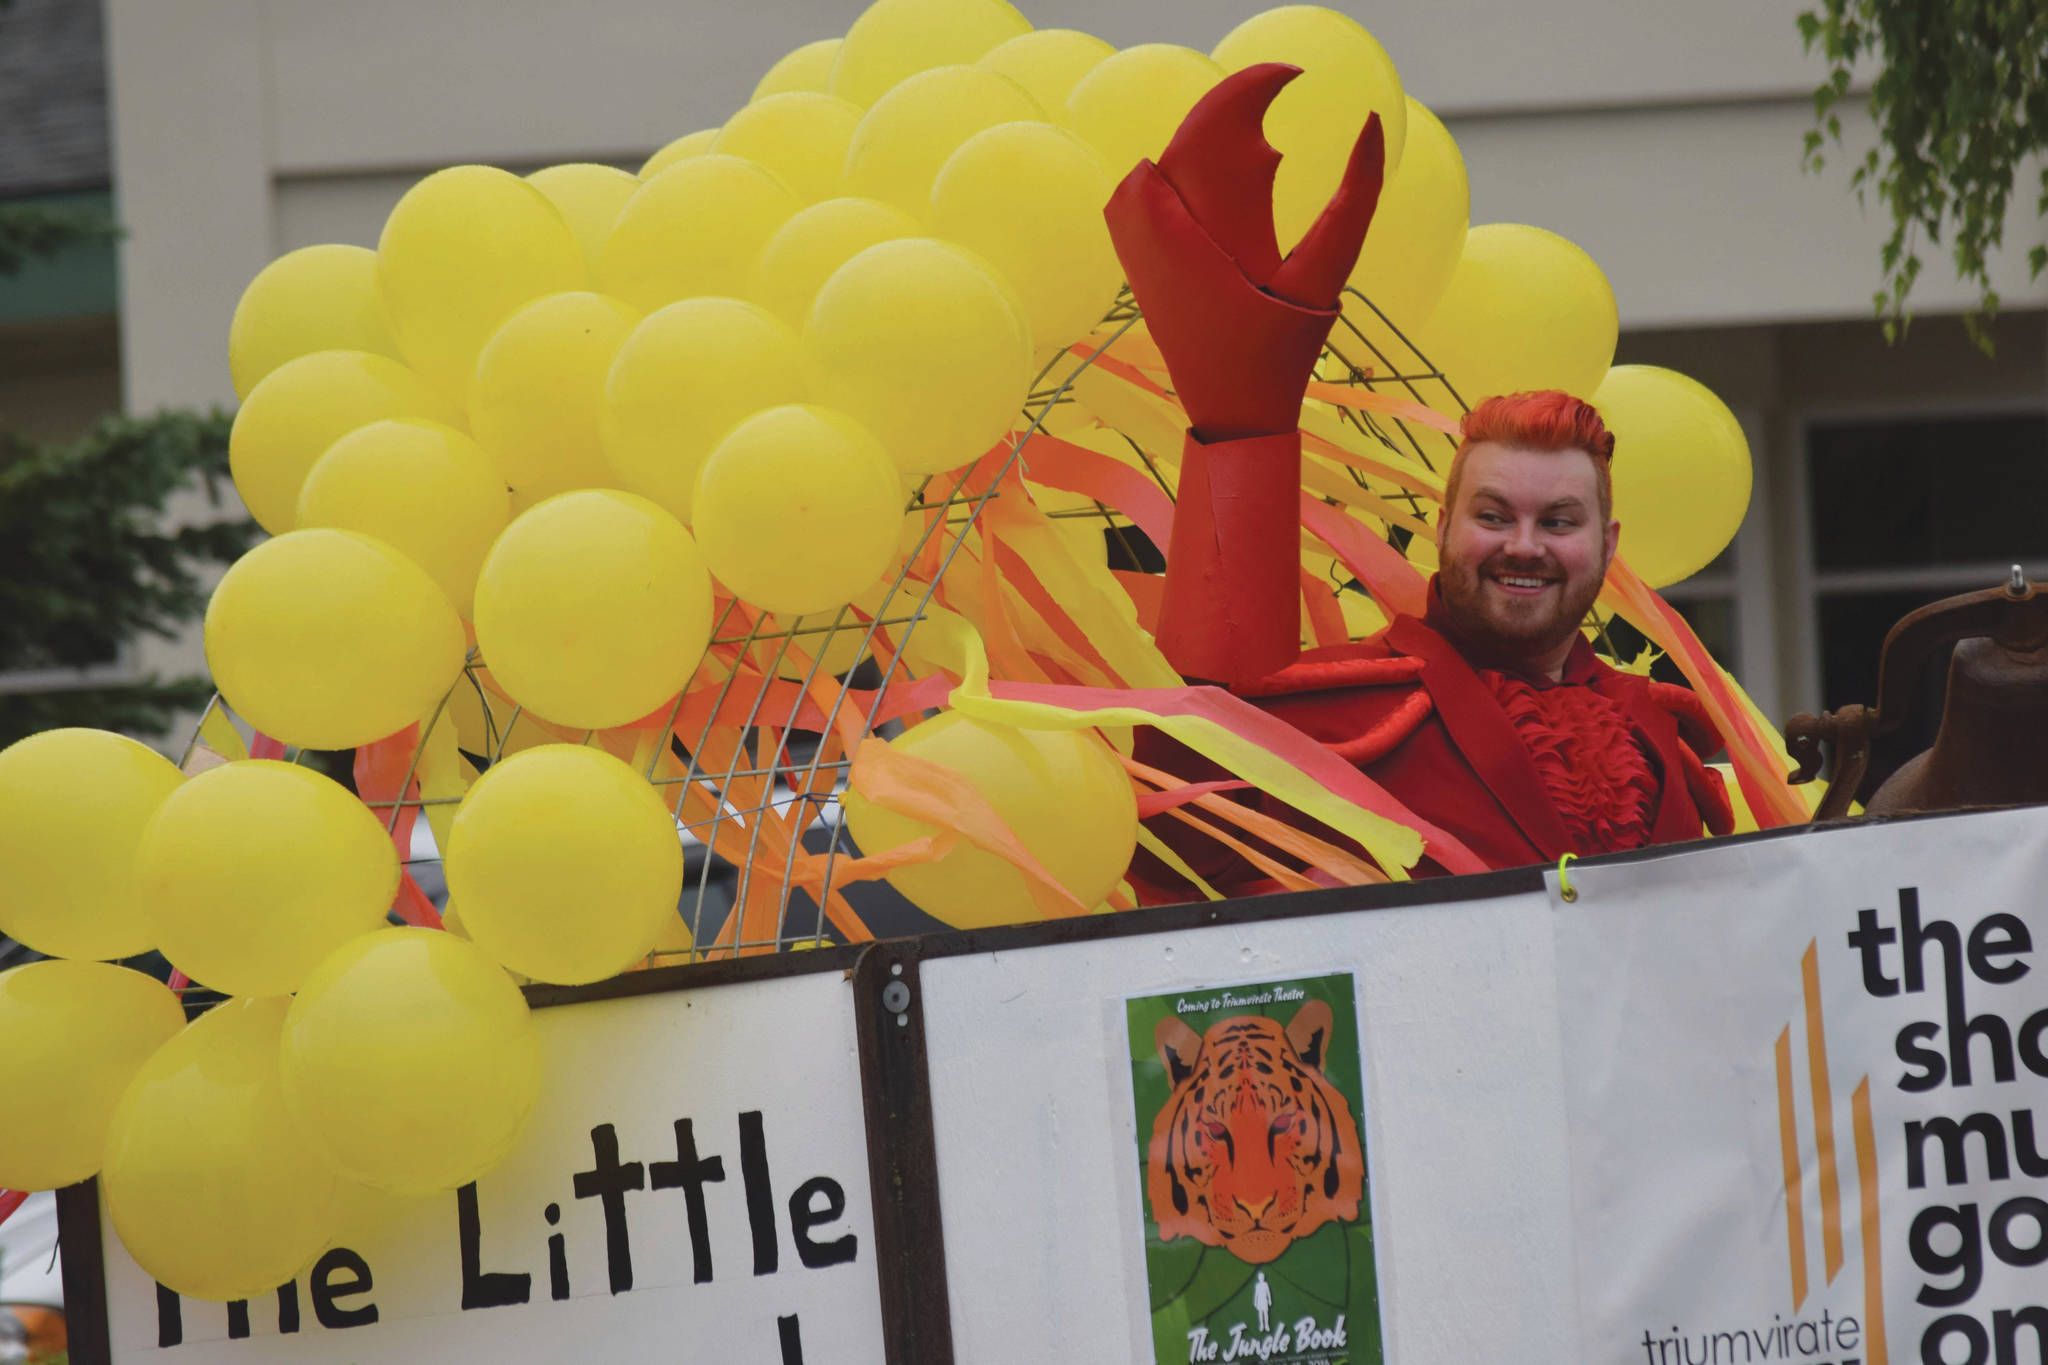 Characters from the "Little Mermaid" wave to the crowd from the Triumvirate Theatre float during the Soldotna Progress Days parade on Saturday, July 24, 2021, in Soldotna, Alaska. (Camille Botello / Peninsula Clarion)